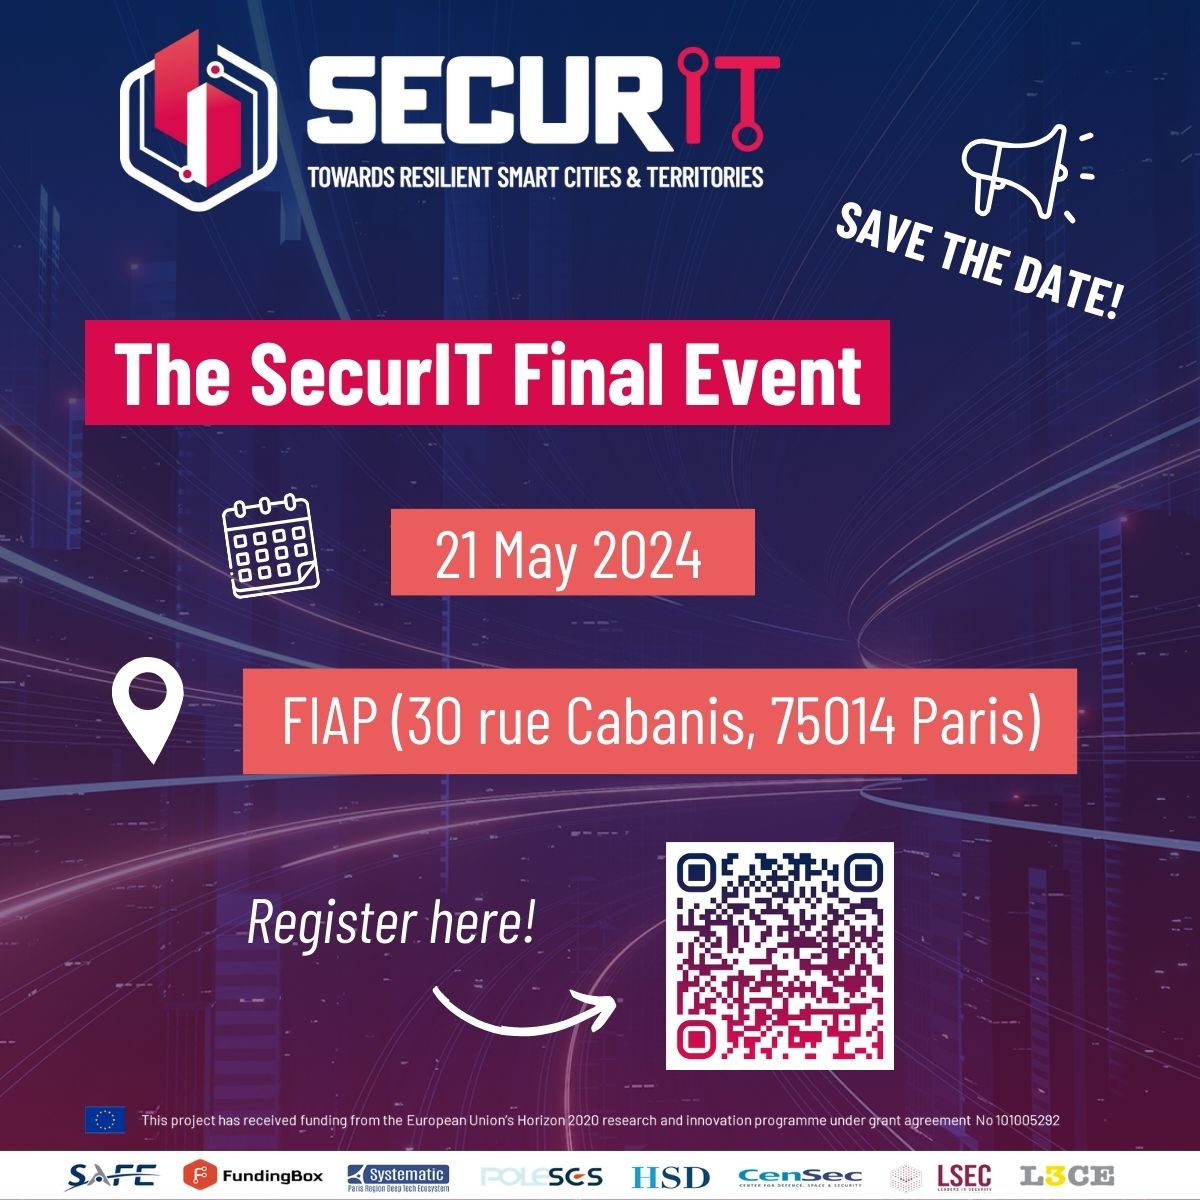 ⌛Less than a month to go until the SecurIT Final Event! Have you already booked your seat? 🗓️21 May 2024 📍FIAP, Paris (30 rue Cabanis) 🔗Registration is free but mandatory: server.matchmaking-studio.com/en/SecureITFin…